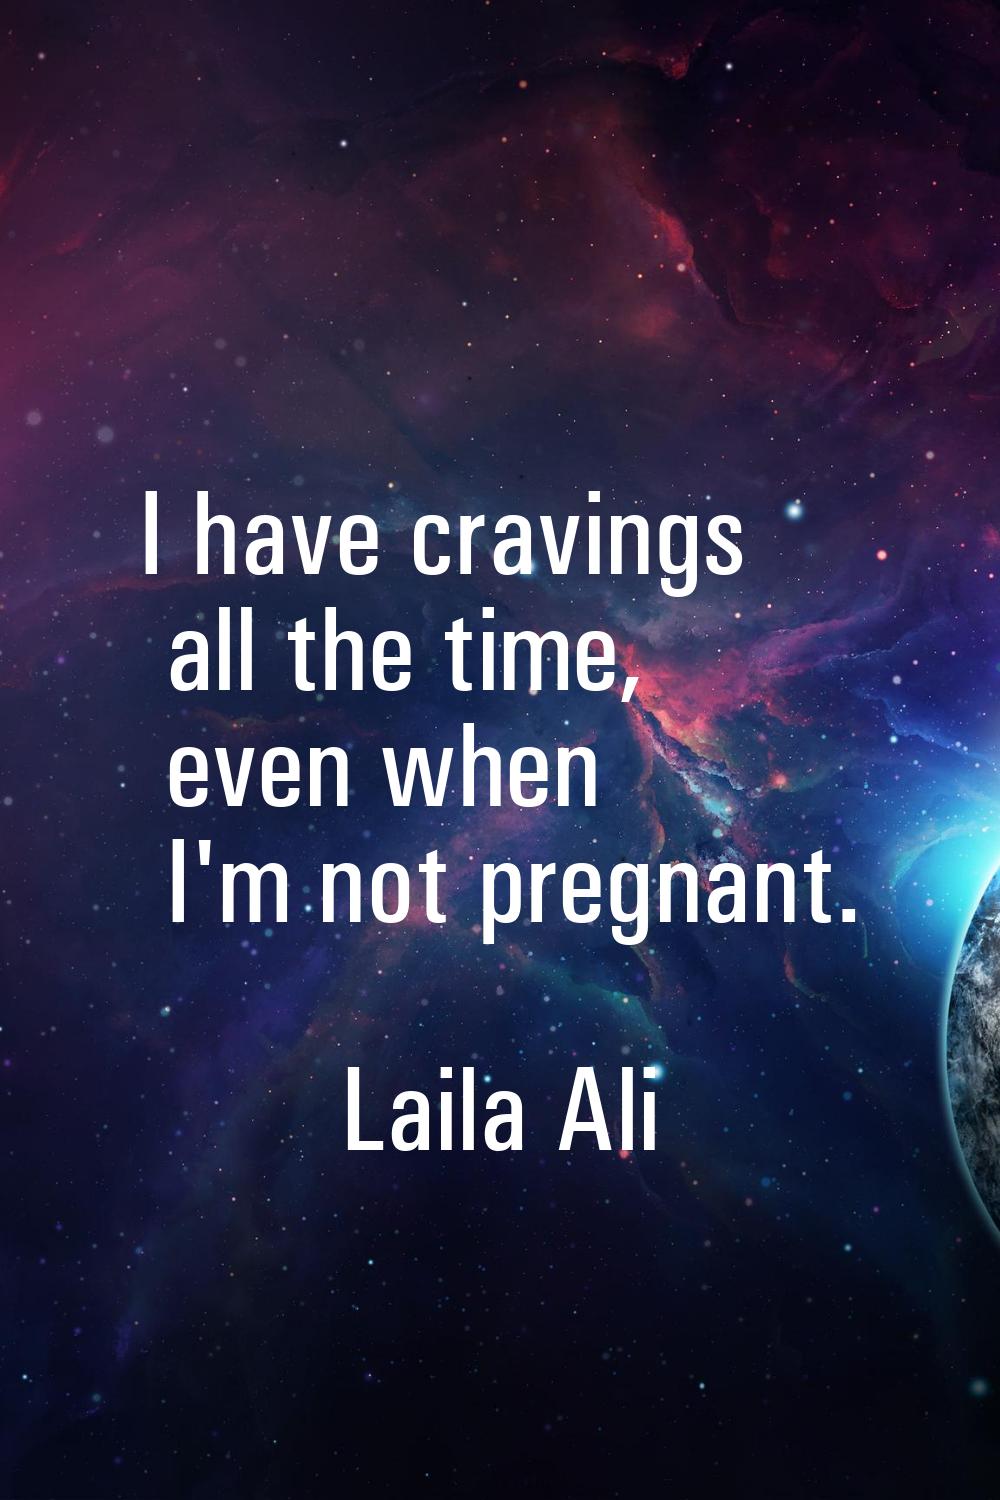 I have cravings all the time, even when I'm not pregnant.